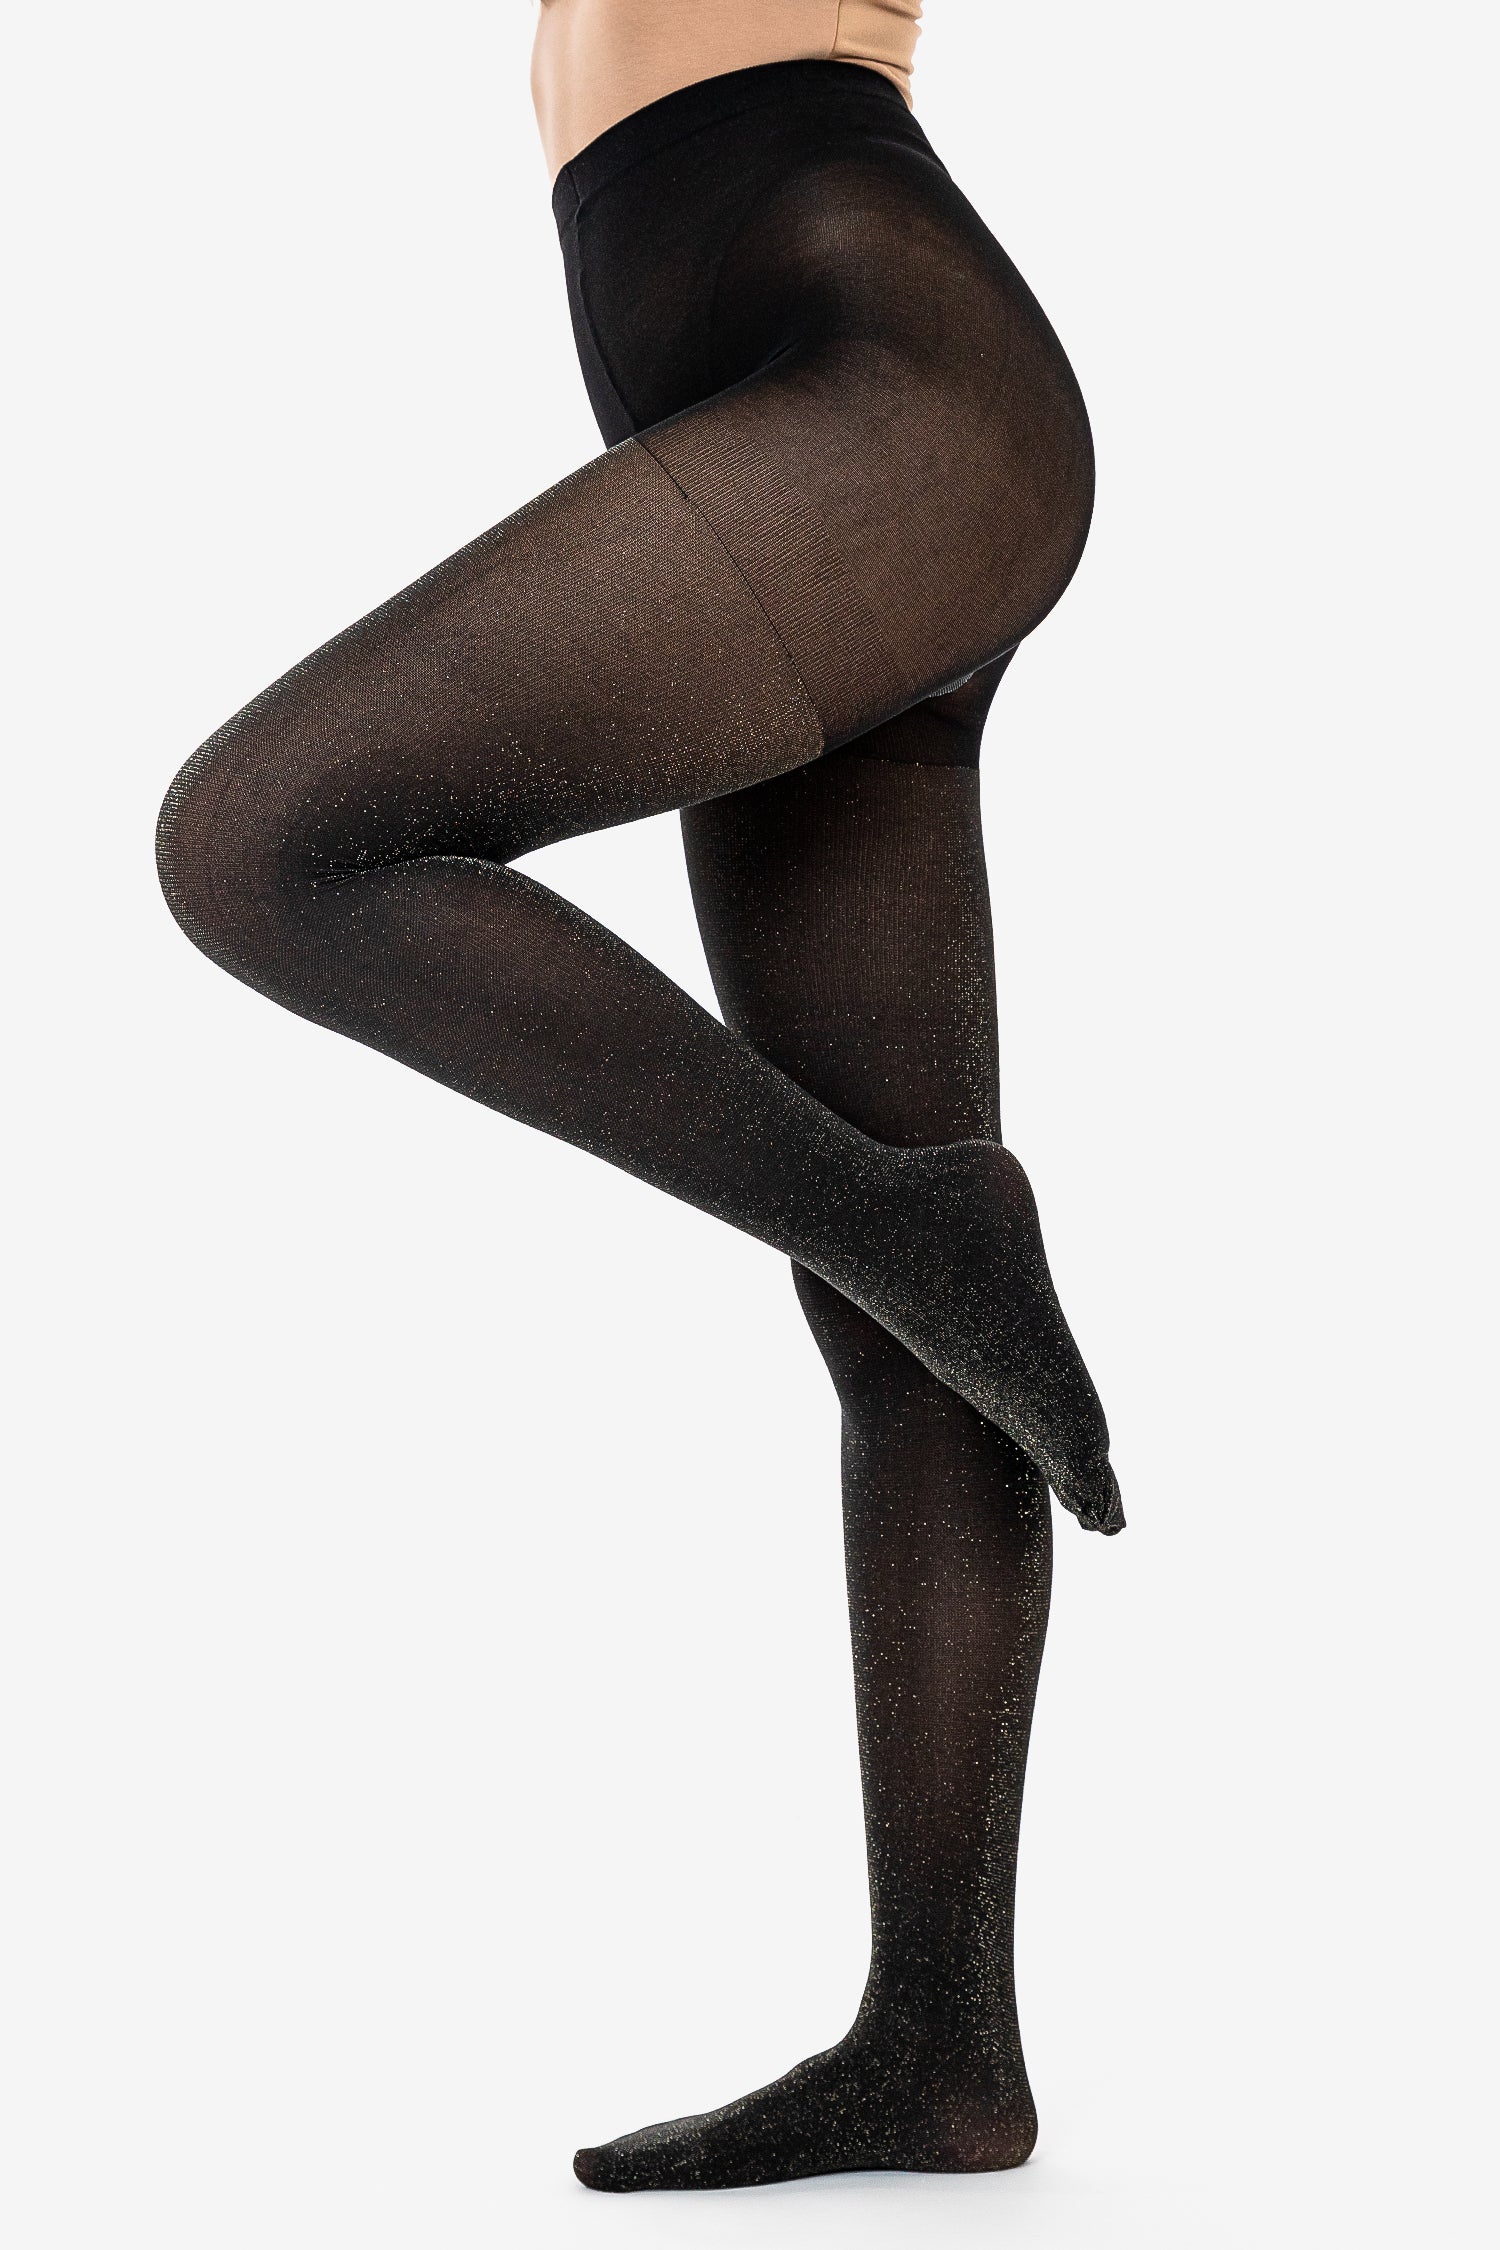 Fancy some sheer glitter tights like these